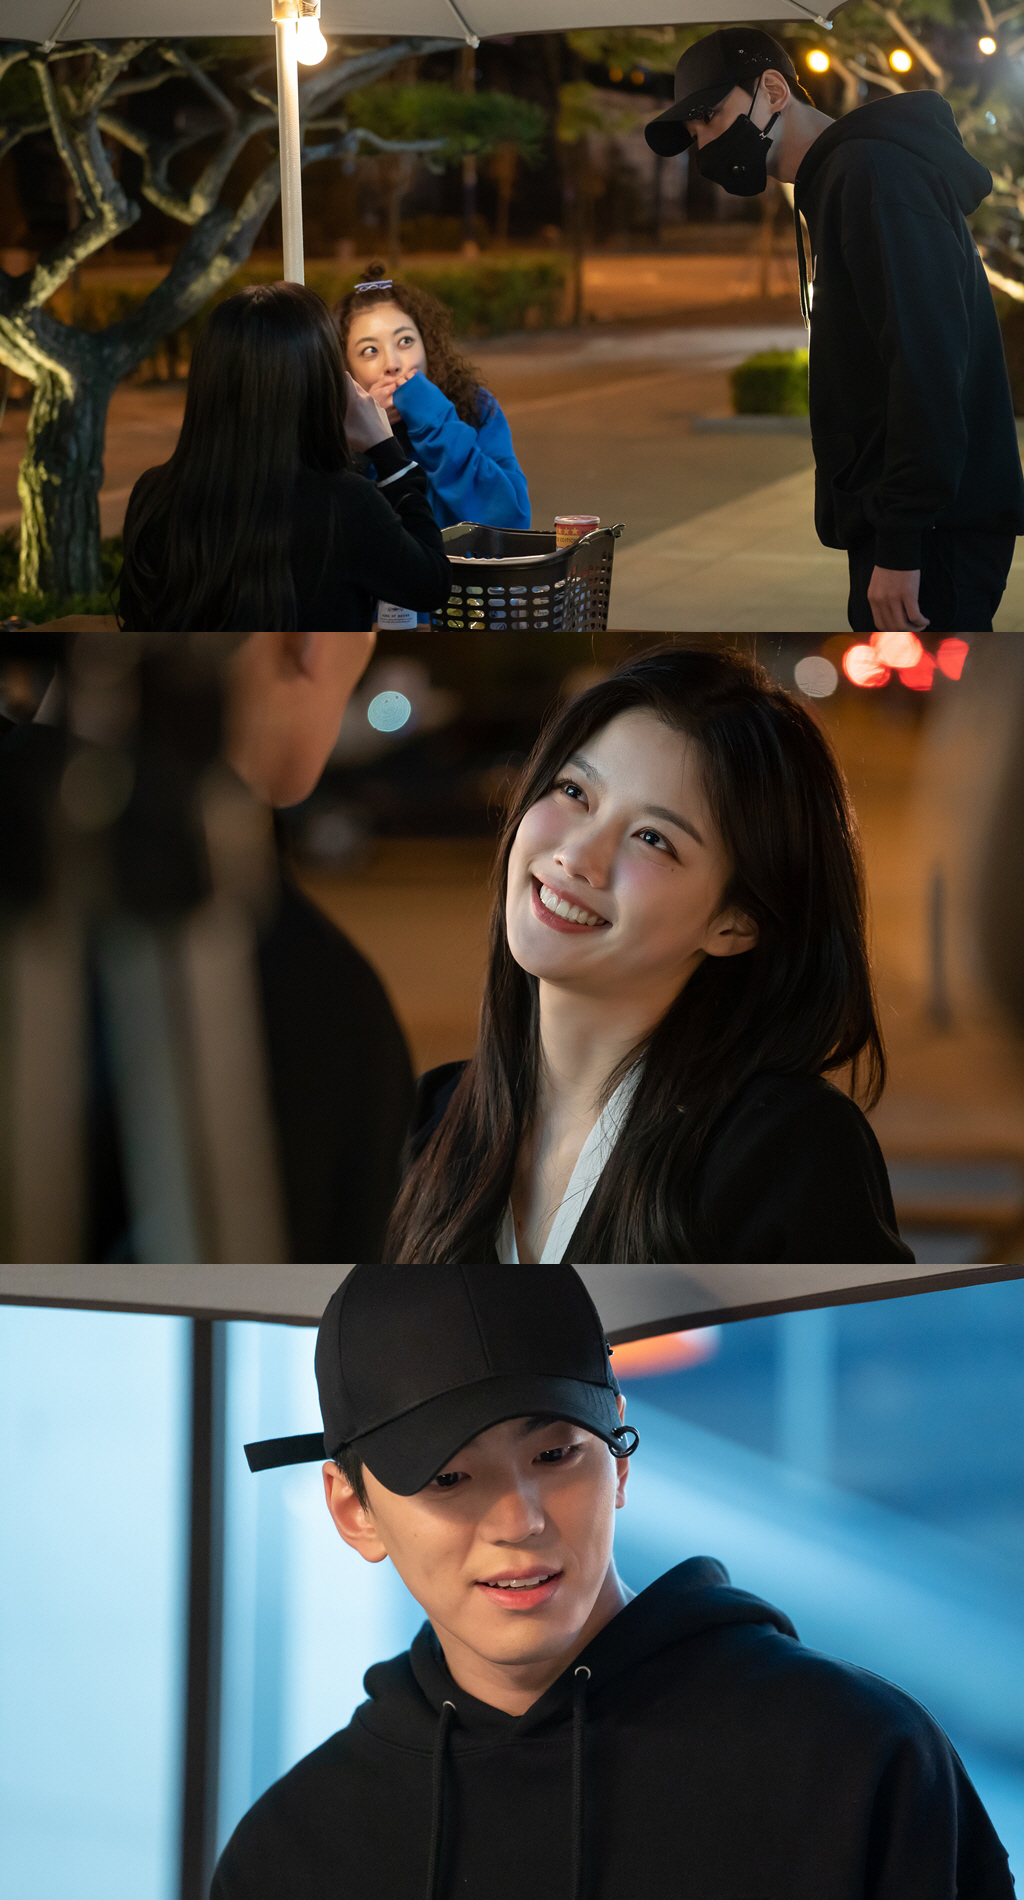 Convenience store morning star Kim Min-kyu appears as a warm committee of Kim Yoo-jung.SBS Geumtod Lamar Jacksons Convenience Store Morning Star (playwright Son Geun-joo/director Lee Myung-woo/Producer Taewon Entertainment) is a 24-hour comic romance in which Hunnam manager Choi Dae-heon (played by Ji Chang-wook) and 4-dimensional alba student Jung Sae-byeol (played by Kim Yoo-jung) stage the Convenience store.In the last three endings, Choi Dae-heon and Jeong Sae-sung, who are amplified by misunderstandings, are foreseen and raise questions about future development.In the 4th episode of Convenience store morning star today (27th), a new figure appears between Choi Dae-heon and Jeong Sae-sung.The warm Nam Sachin (man friend) of Jeong Sae-Sung-Sung, Kang Ji-wook (Kim Min-kyu) appears.Kim Min-kyu will appear in SEK as the elementary school committee Kang Ji-wook of the star, and will bring a strange tension between the star and Choi Dae-heon.In the drama, Kang Ji-wook is a next-generation national star, who has a unique history of making his debut as a movie actor by catching the intensity of entering the Convenience store and riding the media.In the photo released before the broadcast, the meeting between Jung Sae-sung and Kang Ji-wooks Convenience store is caught and focuses attention.In the photo, the star is drinking beer with friends, who may have been upset. Kang Ji-wook, wearing a black mask, is approaching and greeting him.The appearance of Friends who catch up with movie star Kang Ji-wook can be seen as a famous star.In particular, Kang Ji-wook, who approached Jeong-Sae-Byeol first, suggests that they were friendly in the past.What will they be reunited for a long time? Expectations are added to the story of Convenience store morning star, which will become more exciting with the appearance of Kang Ji-wook.Convenience store morning star production team said, Despite Kim Min-kyus appearance in SEK, it will continue to appear as a major role to revitalize the drama.I hope that Kim Min-kyu will appear as a next-generation national star and a warm-hearted Nam Sa-jin of the star. Meanwhile, the fourth episode of Convenience Store Morning Star by Kim Min-kyu will be broadcast at 10 p.m. today (27th).